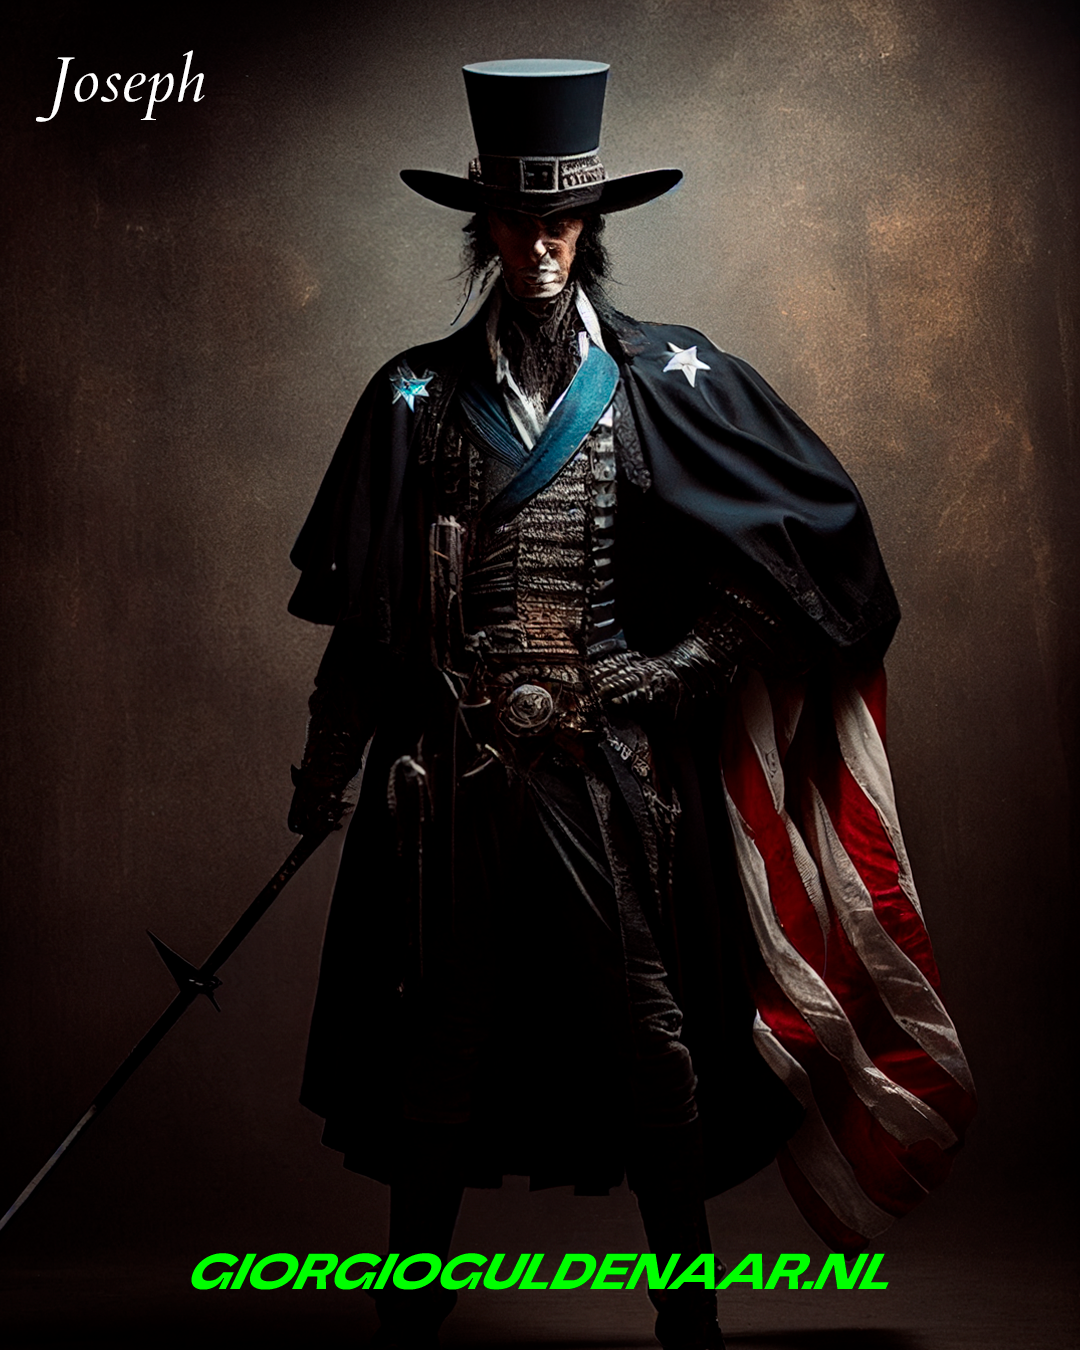 American samurai wearing the american flag on his outfit carrying a sword